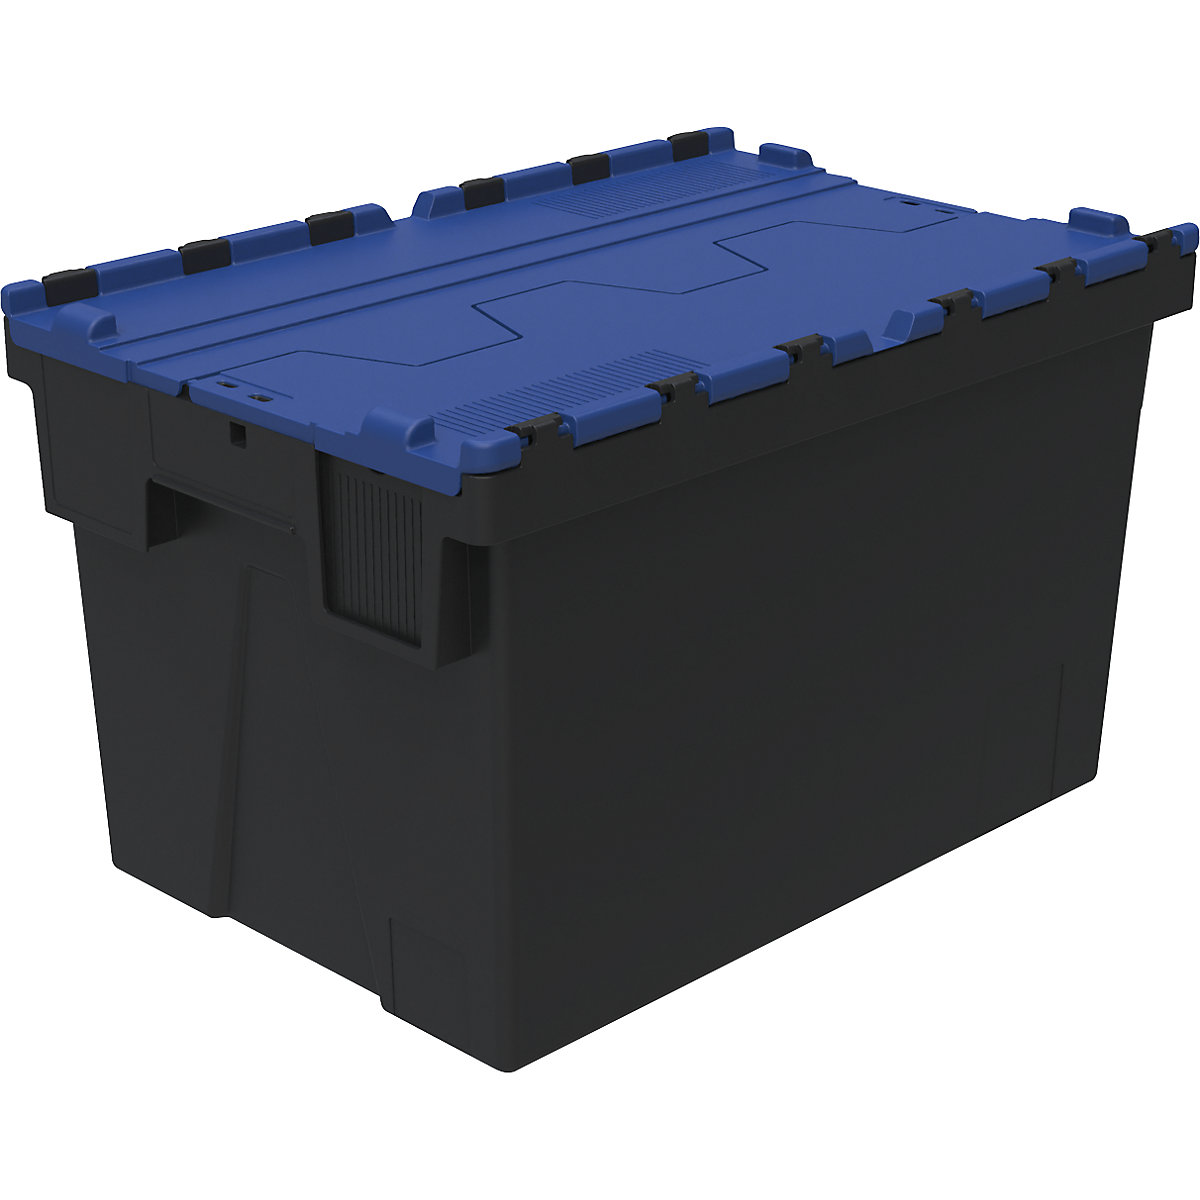 Reusable stacking container